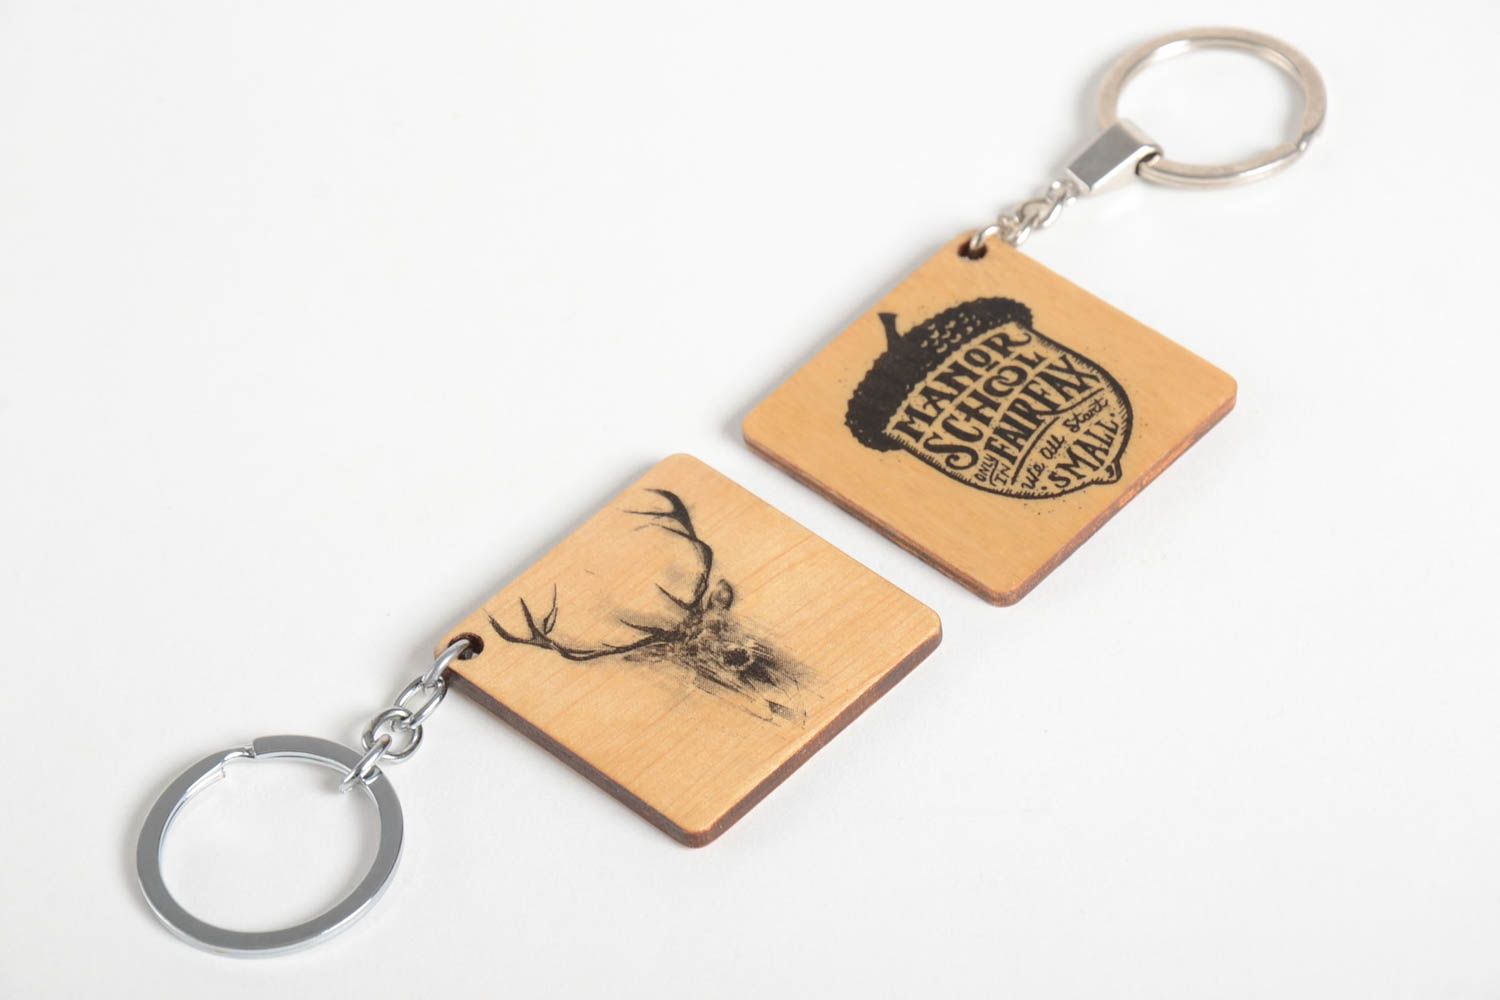 Handmade keychain wooden keychains set of 2 products unusual gift for men photo 5